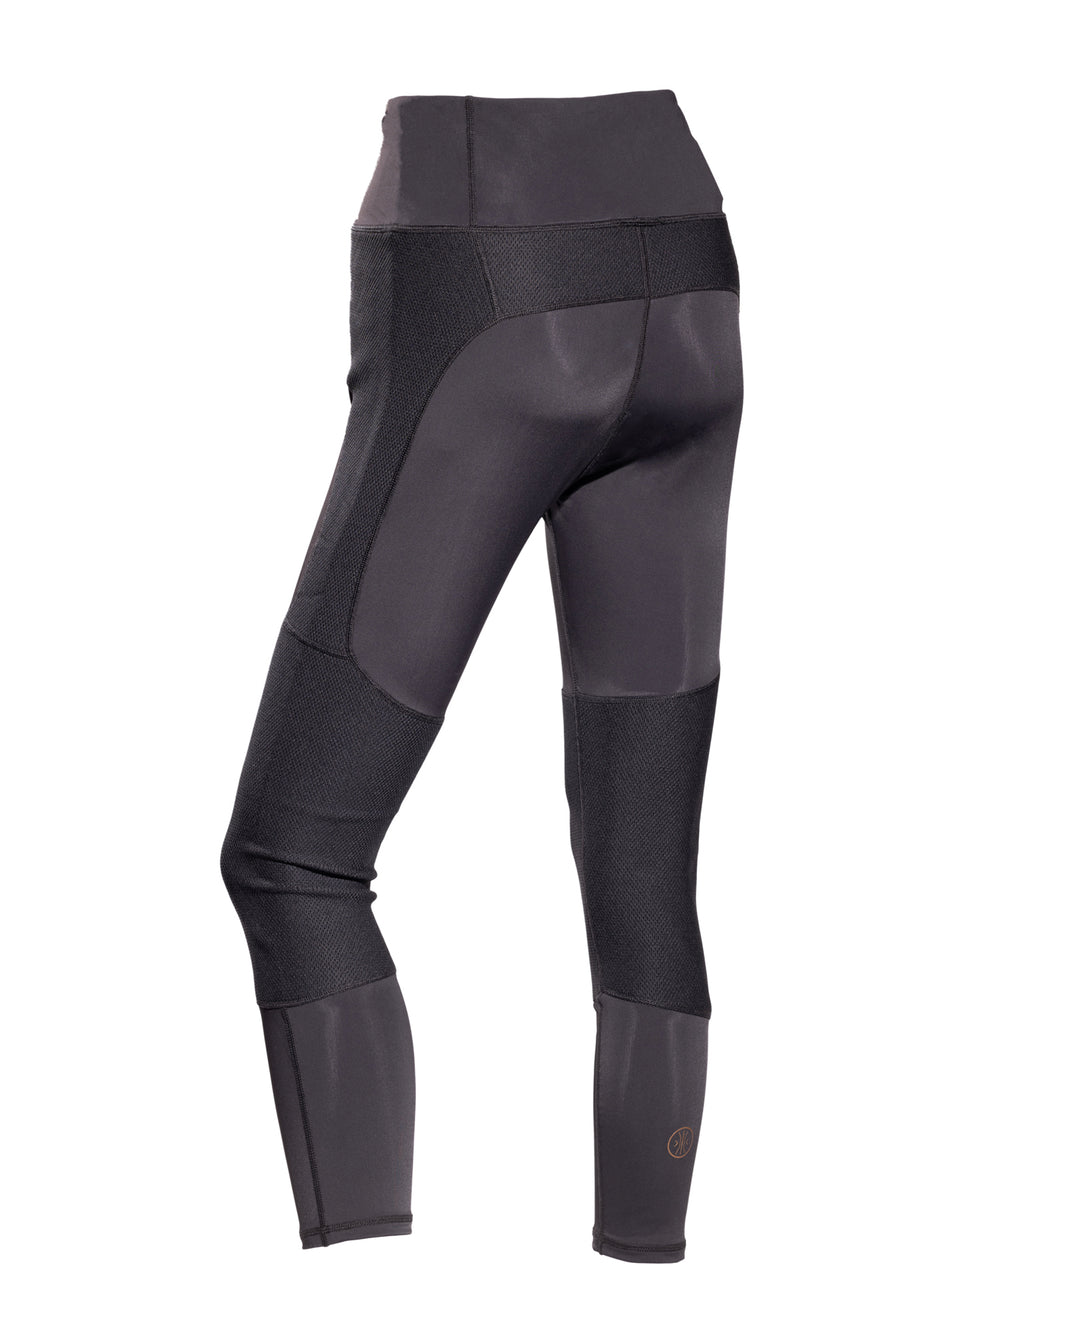 Ski leggings for women, leggings, Skiing takes its toll, even when I'm  at my fittest so I'm wearing my secret weapon, IMBRACE compression leggings.  These help me feel confident